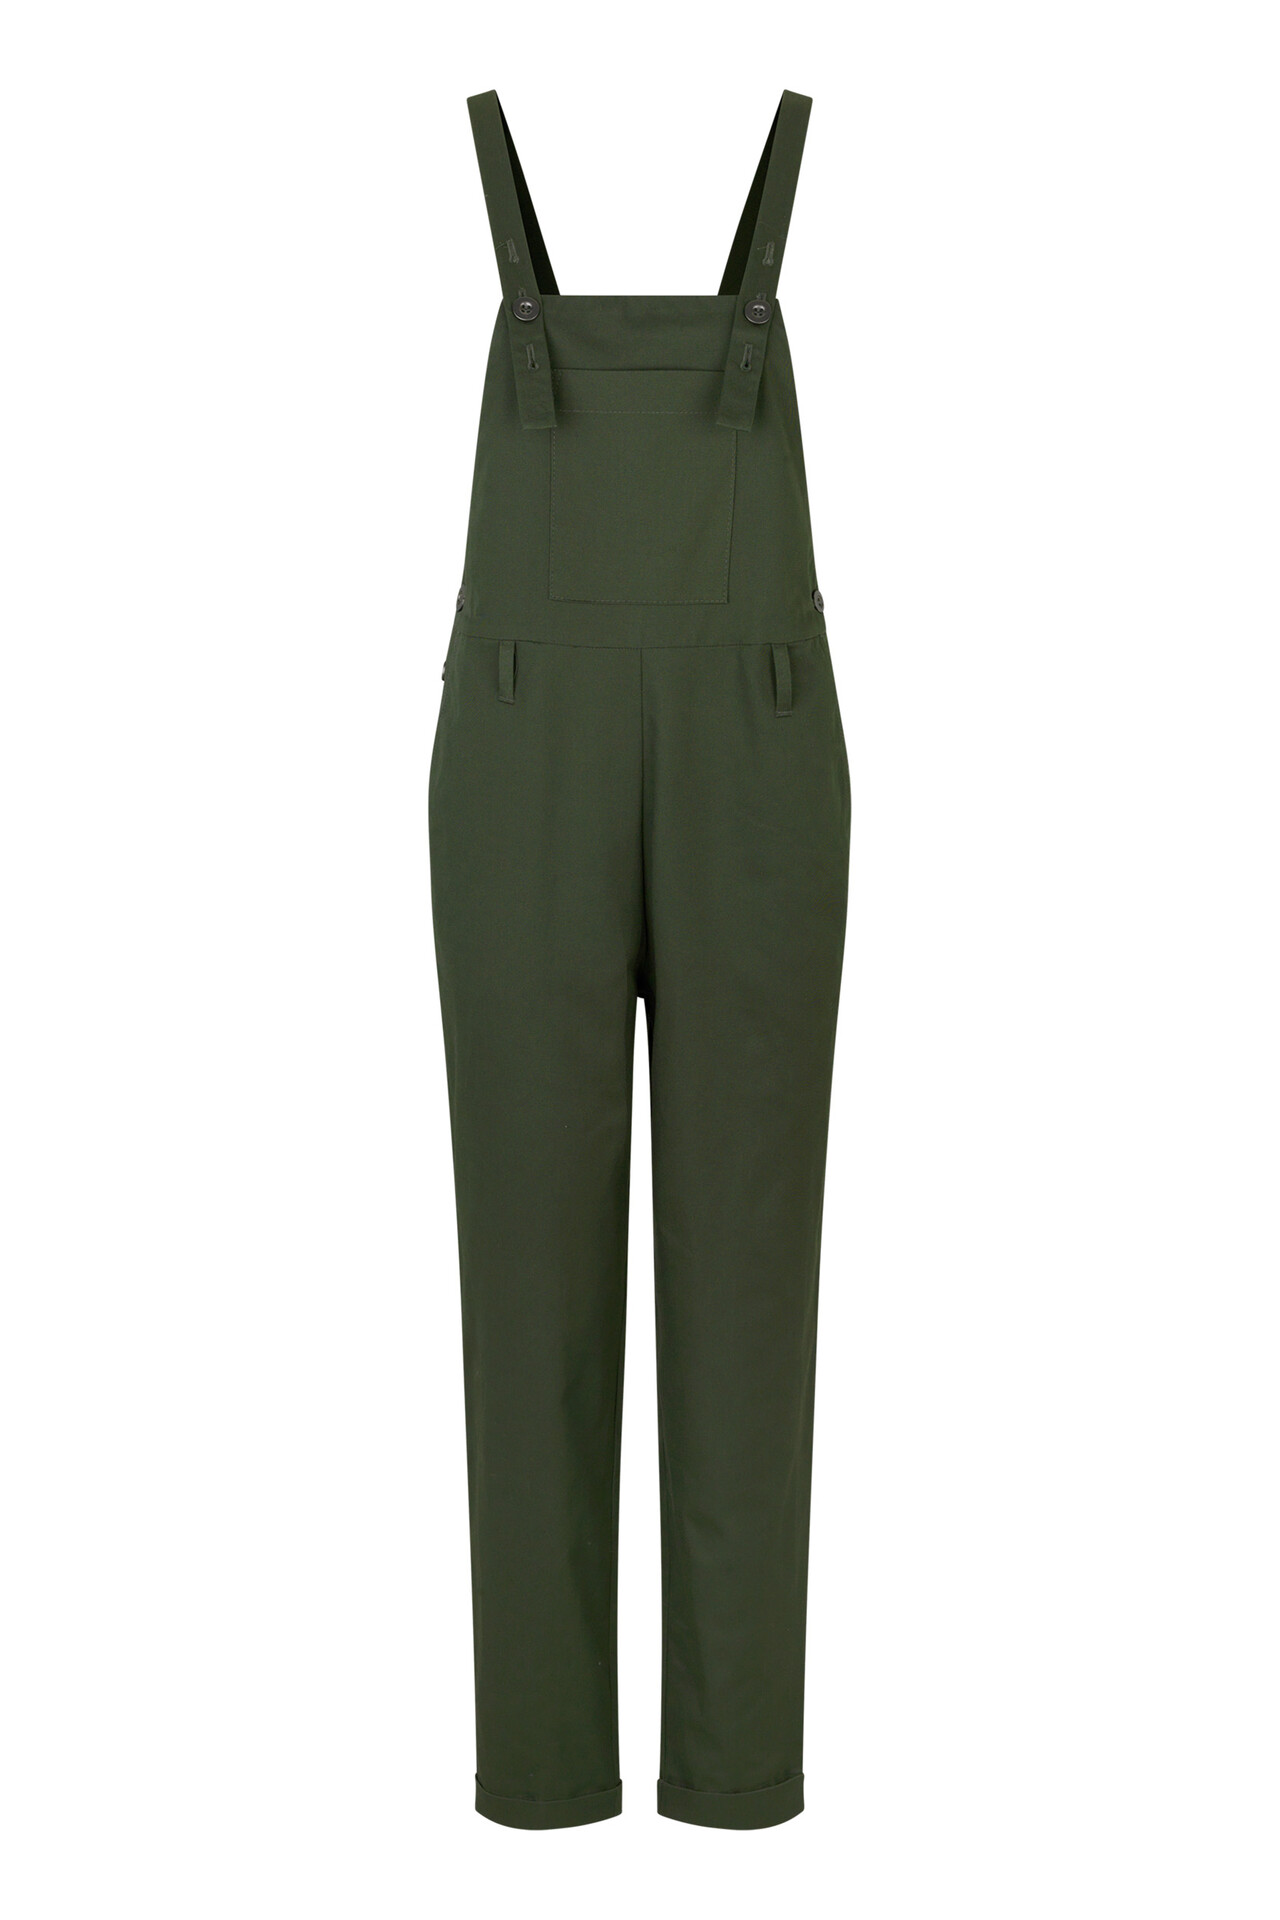 CRÉTON Worker overalls (ARMY GRØN 36)